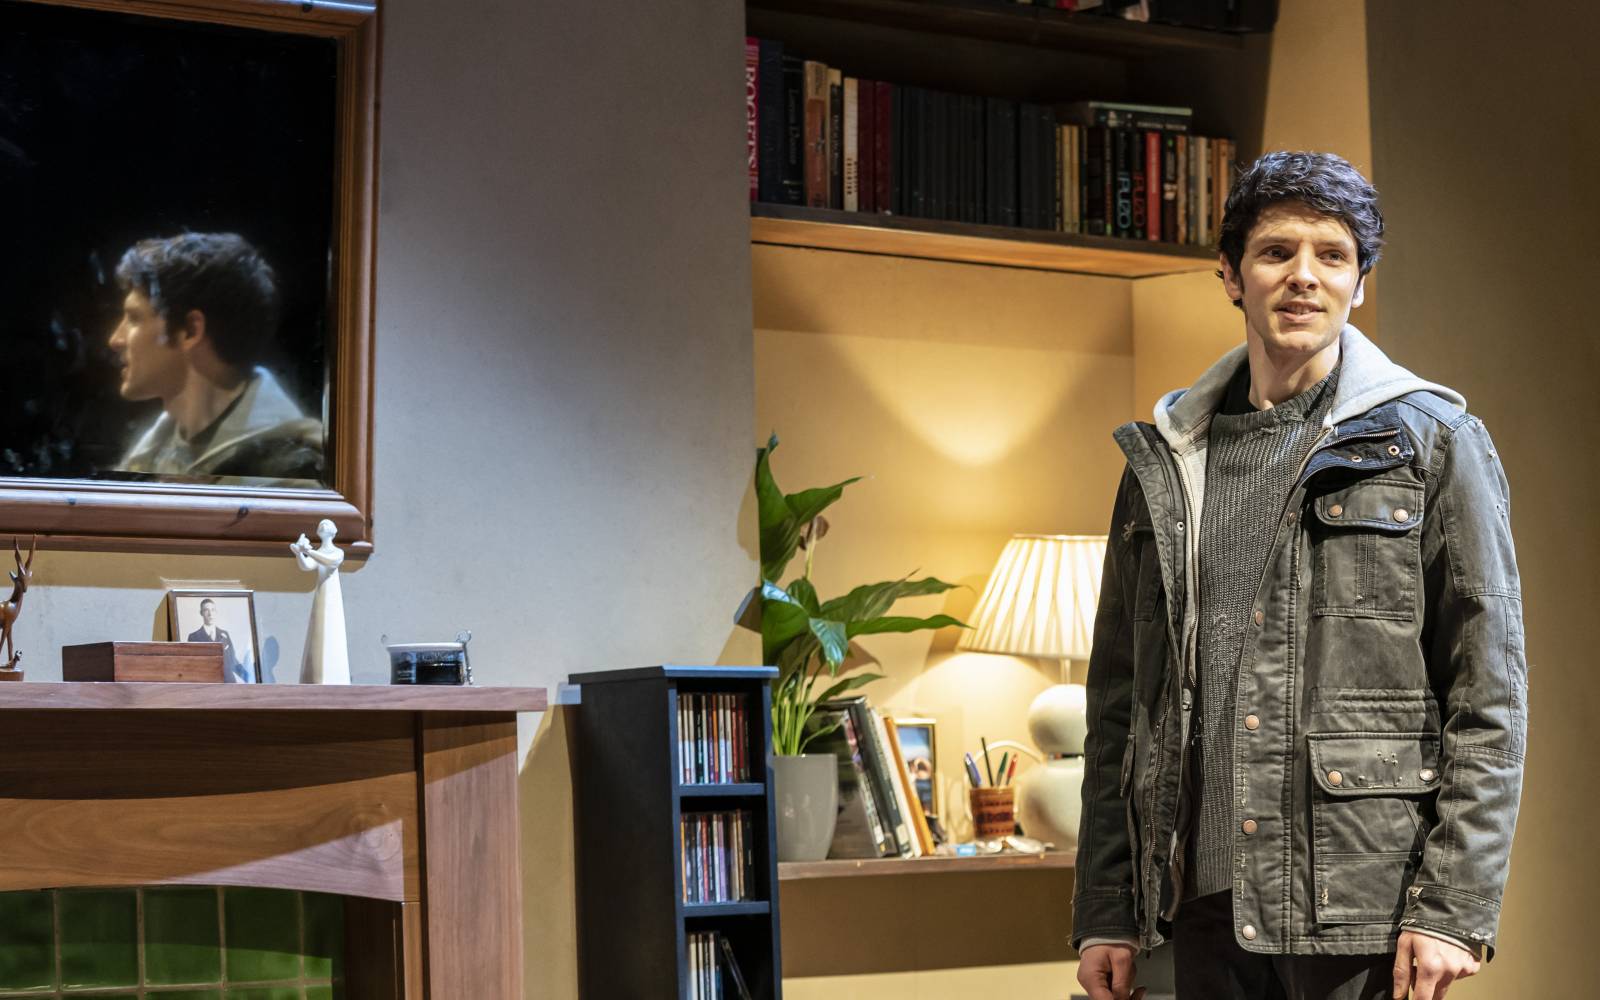 Colin Morgan as Bernard stands in a modern living room, in front of his reflection in the mirror